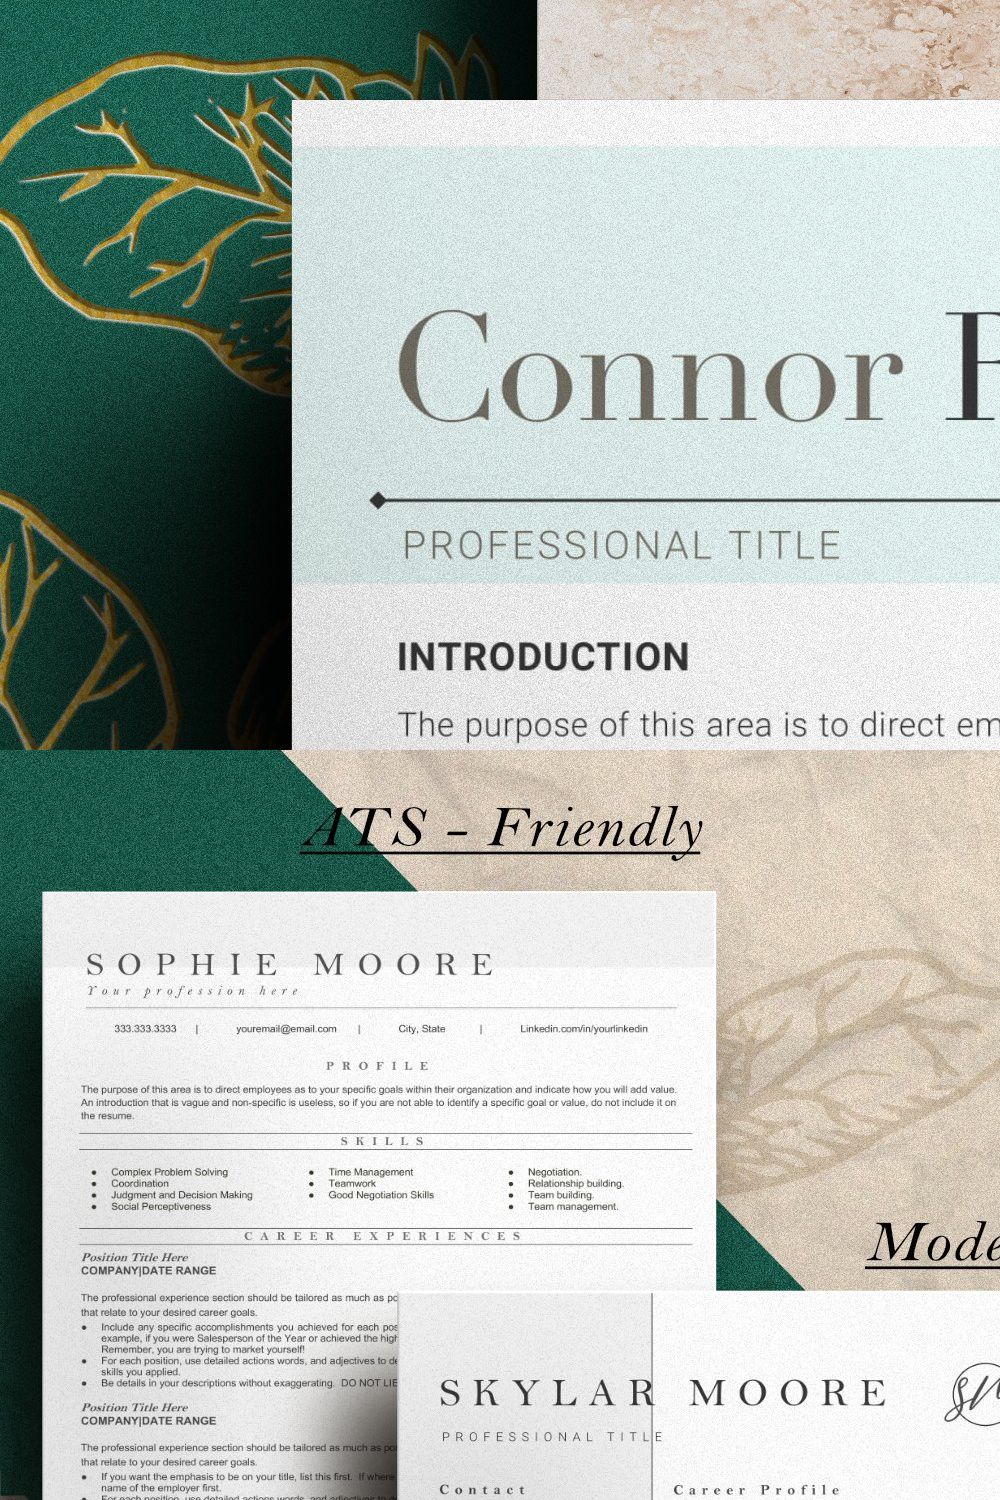 Resume / CV with bonuses! - Connor pinterest preview image.